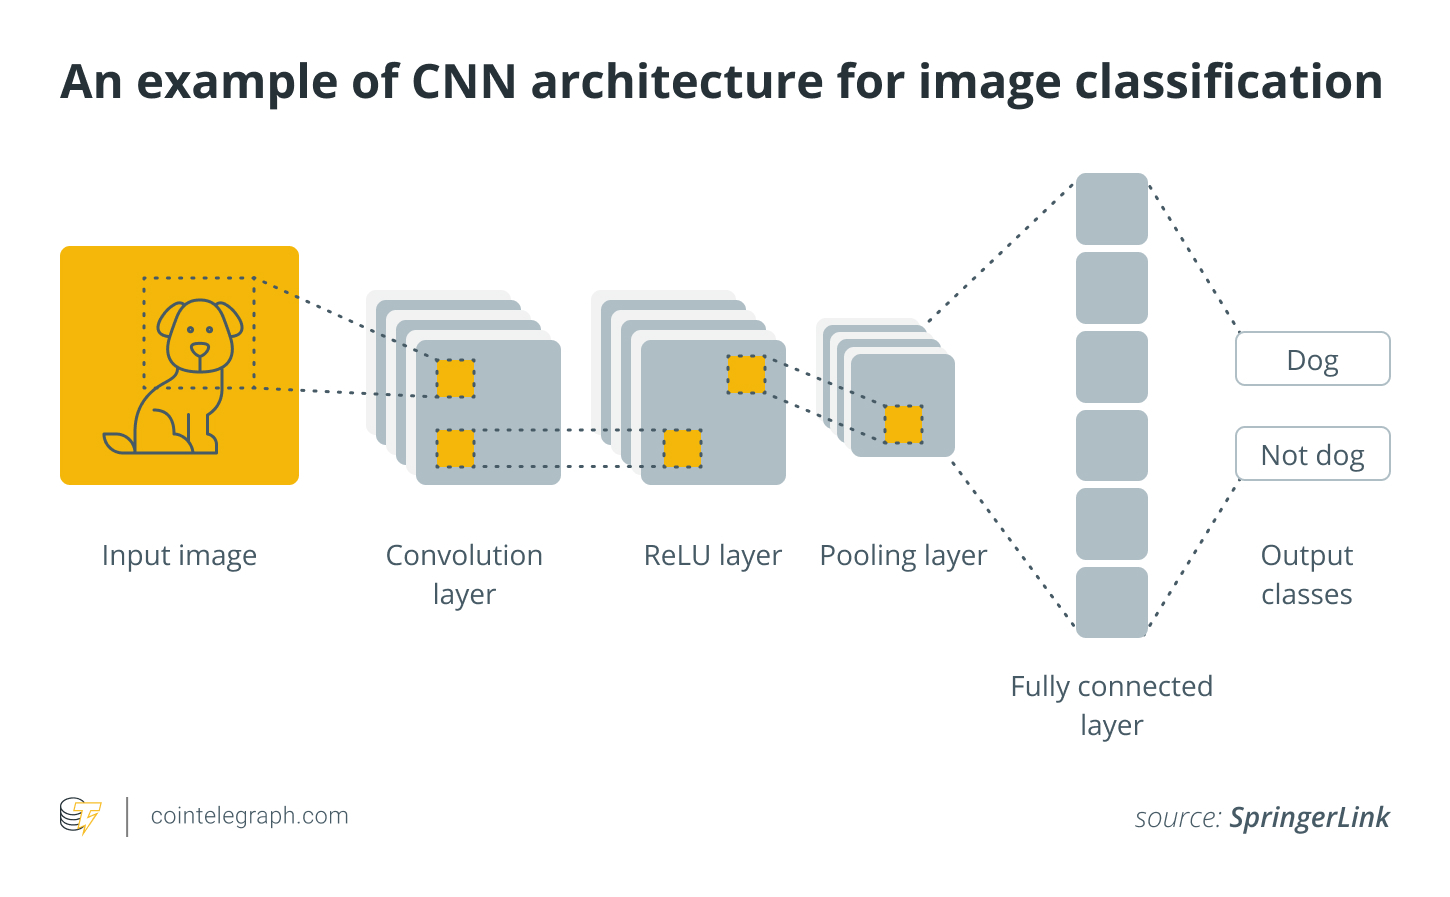 An example of CNN architecture for image classification